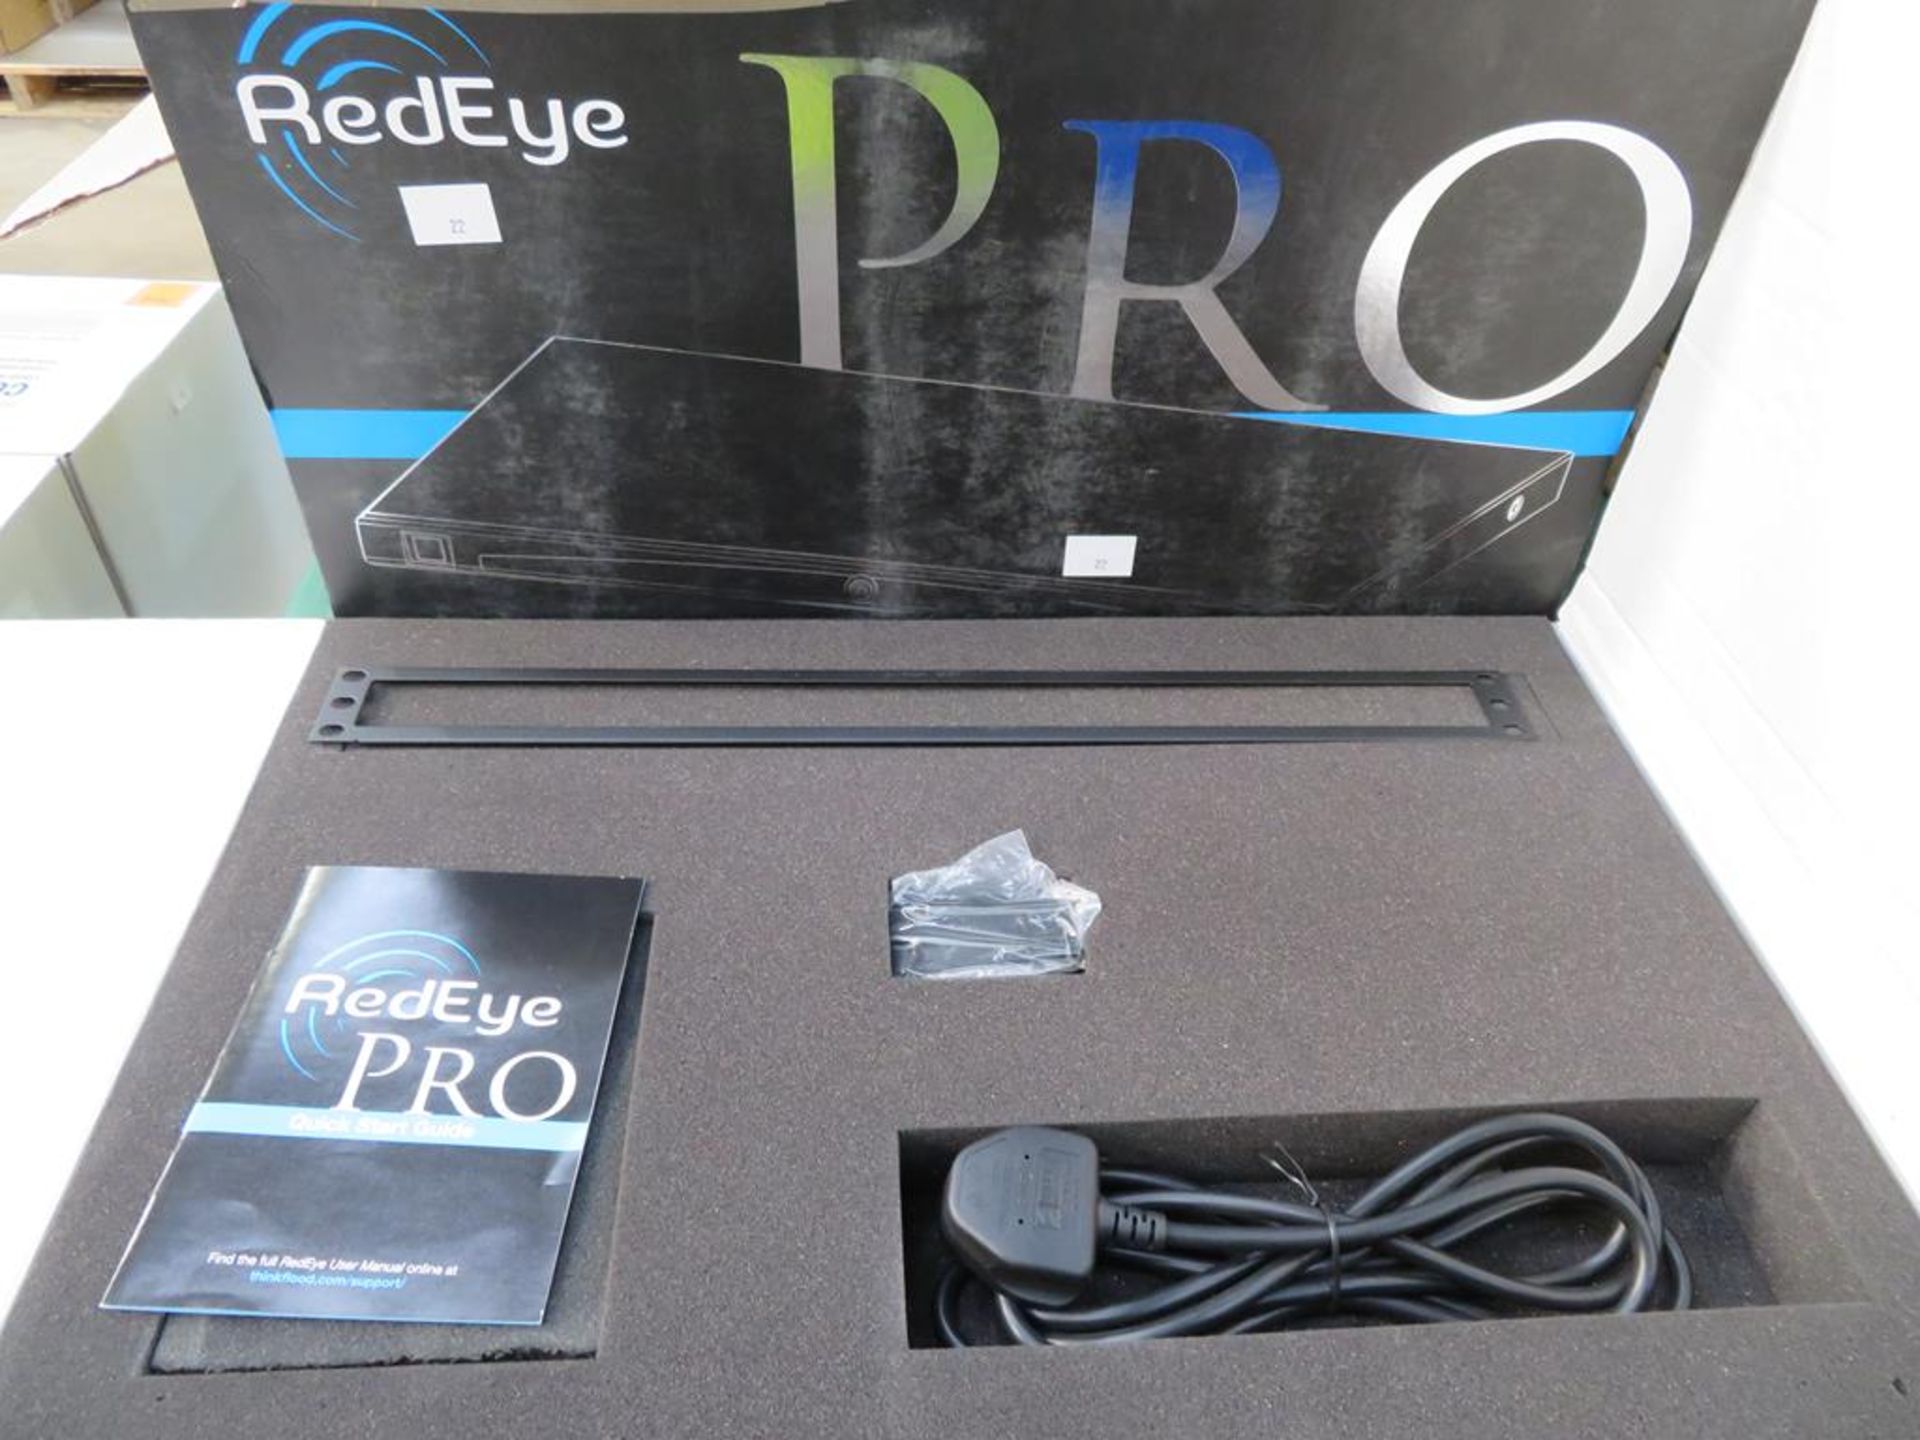 Red Eye Pro Networked Home Automation Processor